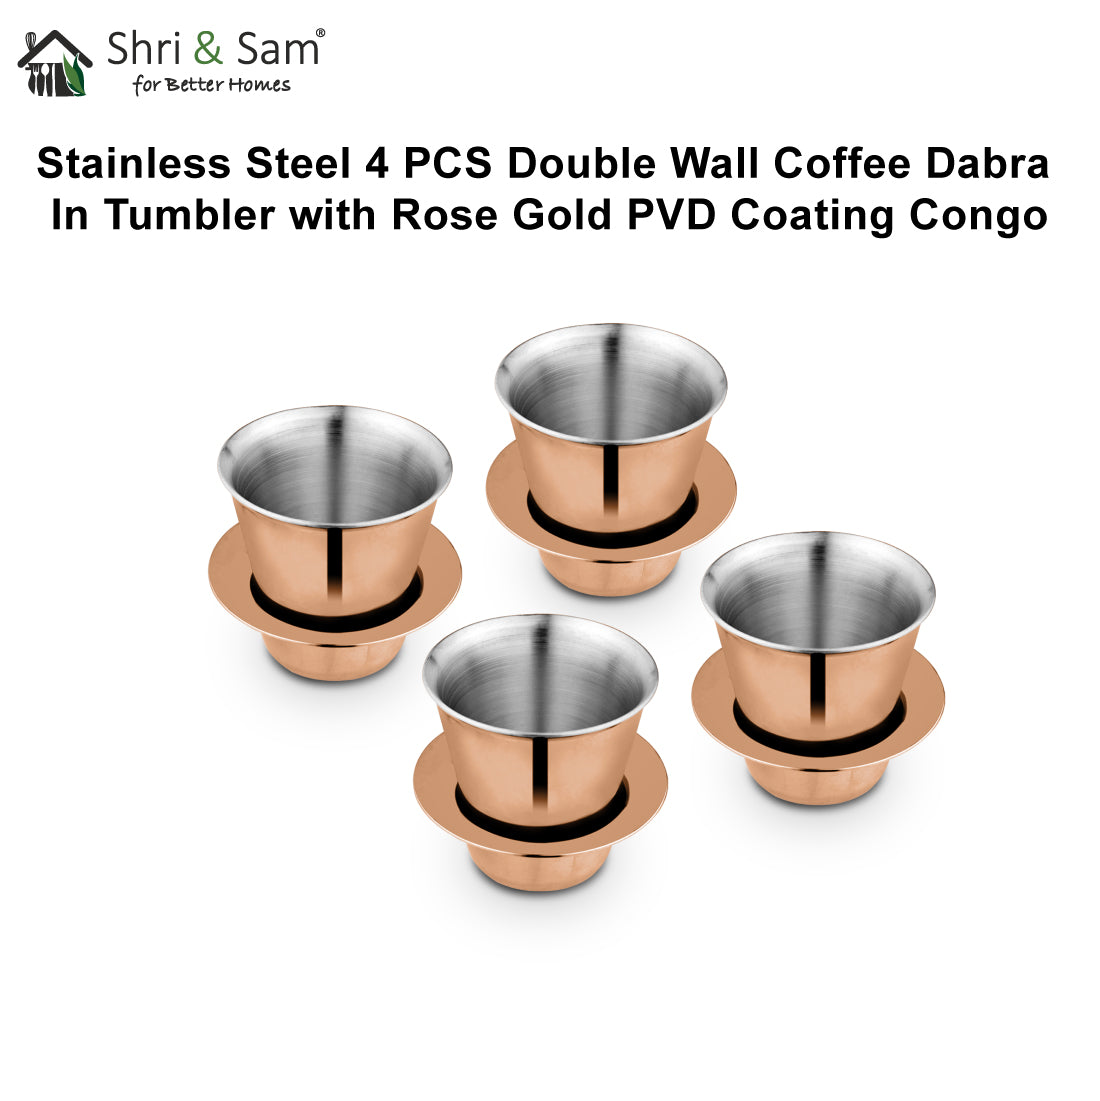 Stainless Steel 4 PCS Double Wall Coffee Dabra In Tumbler with Rose Gold PVD Coating Congo